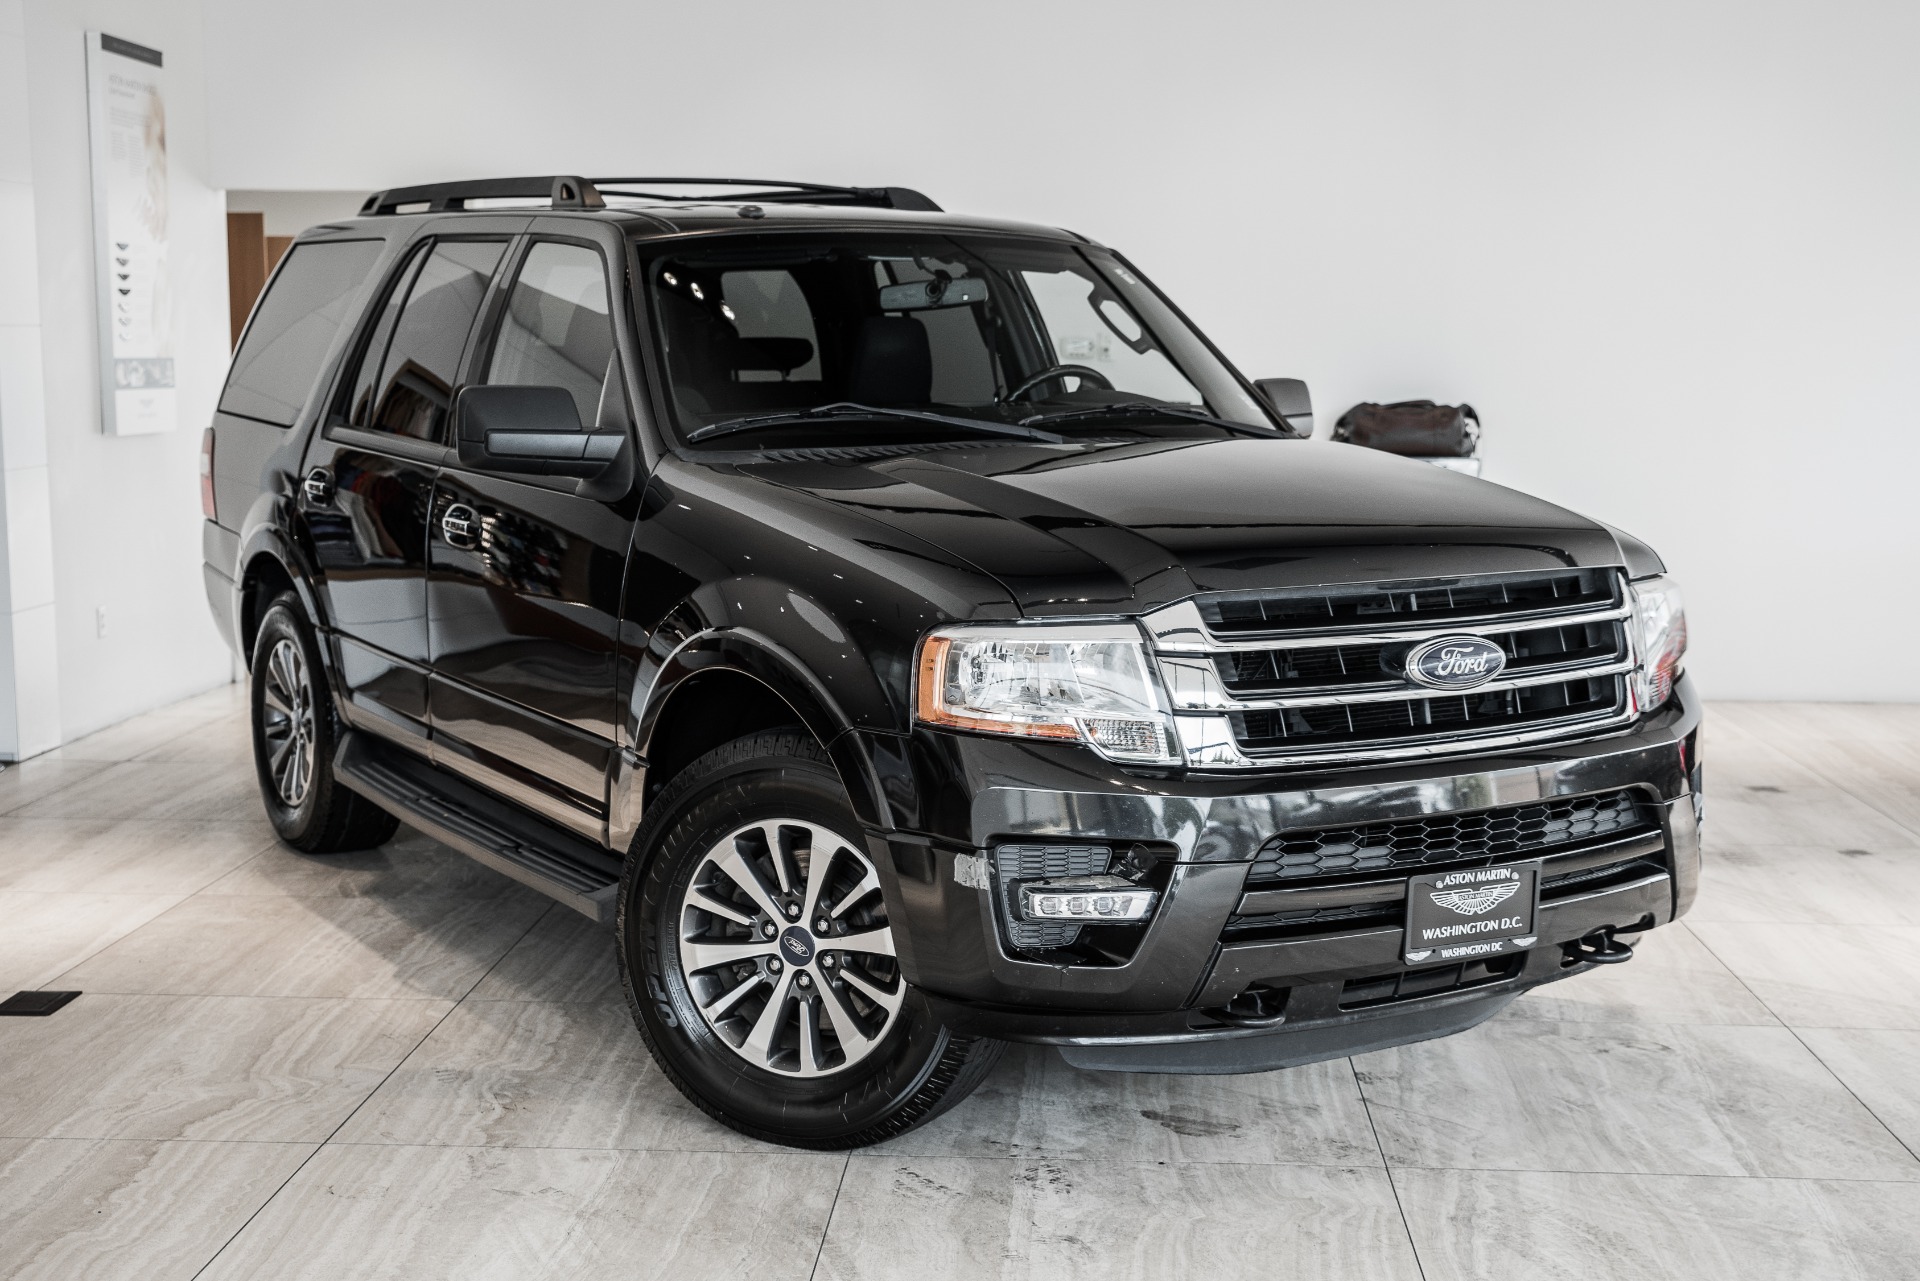 2015 Ford Expedition XLT Stock # P725861A for sale near Vienna, VA | VA